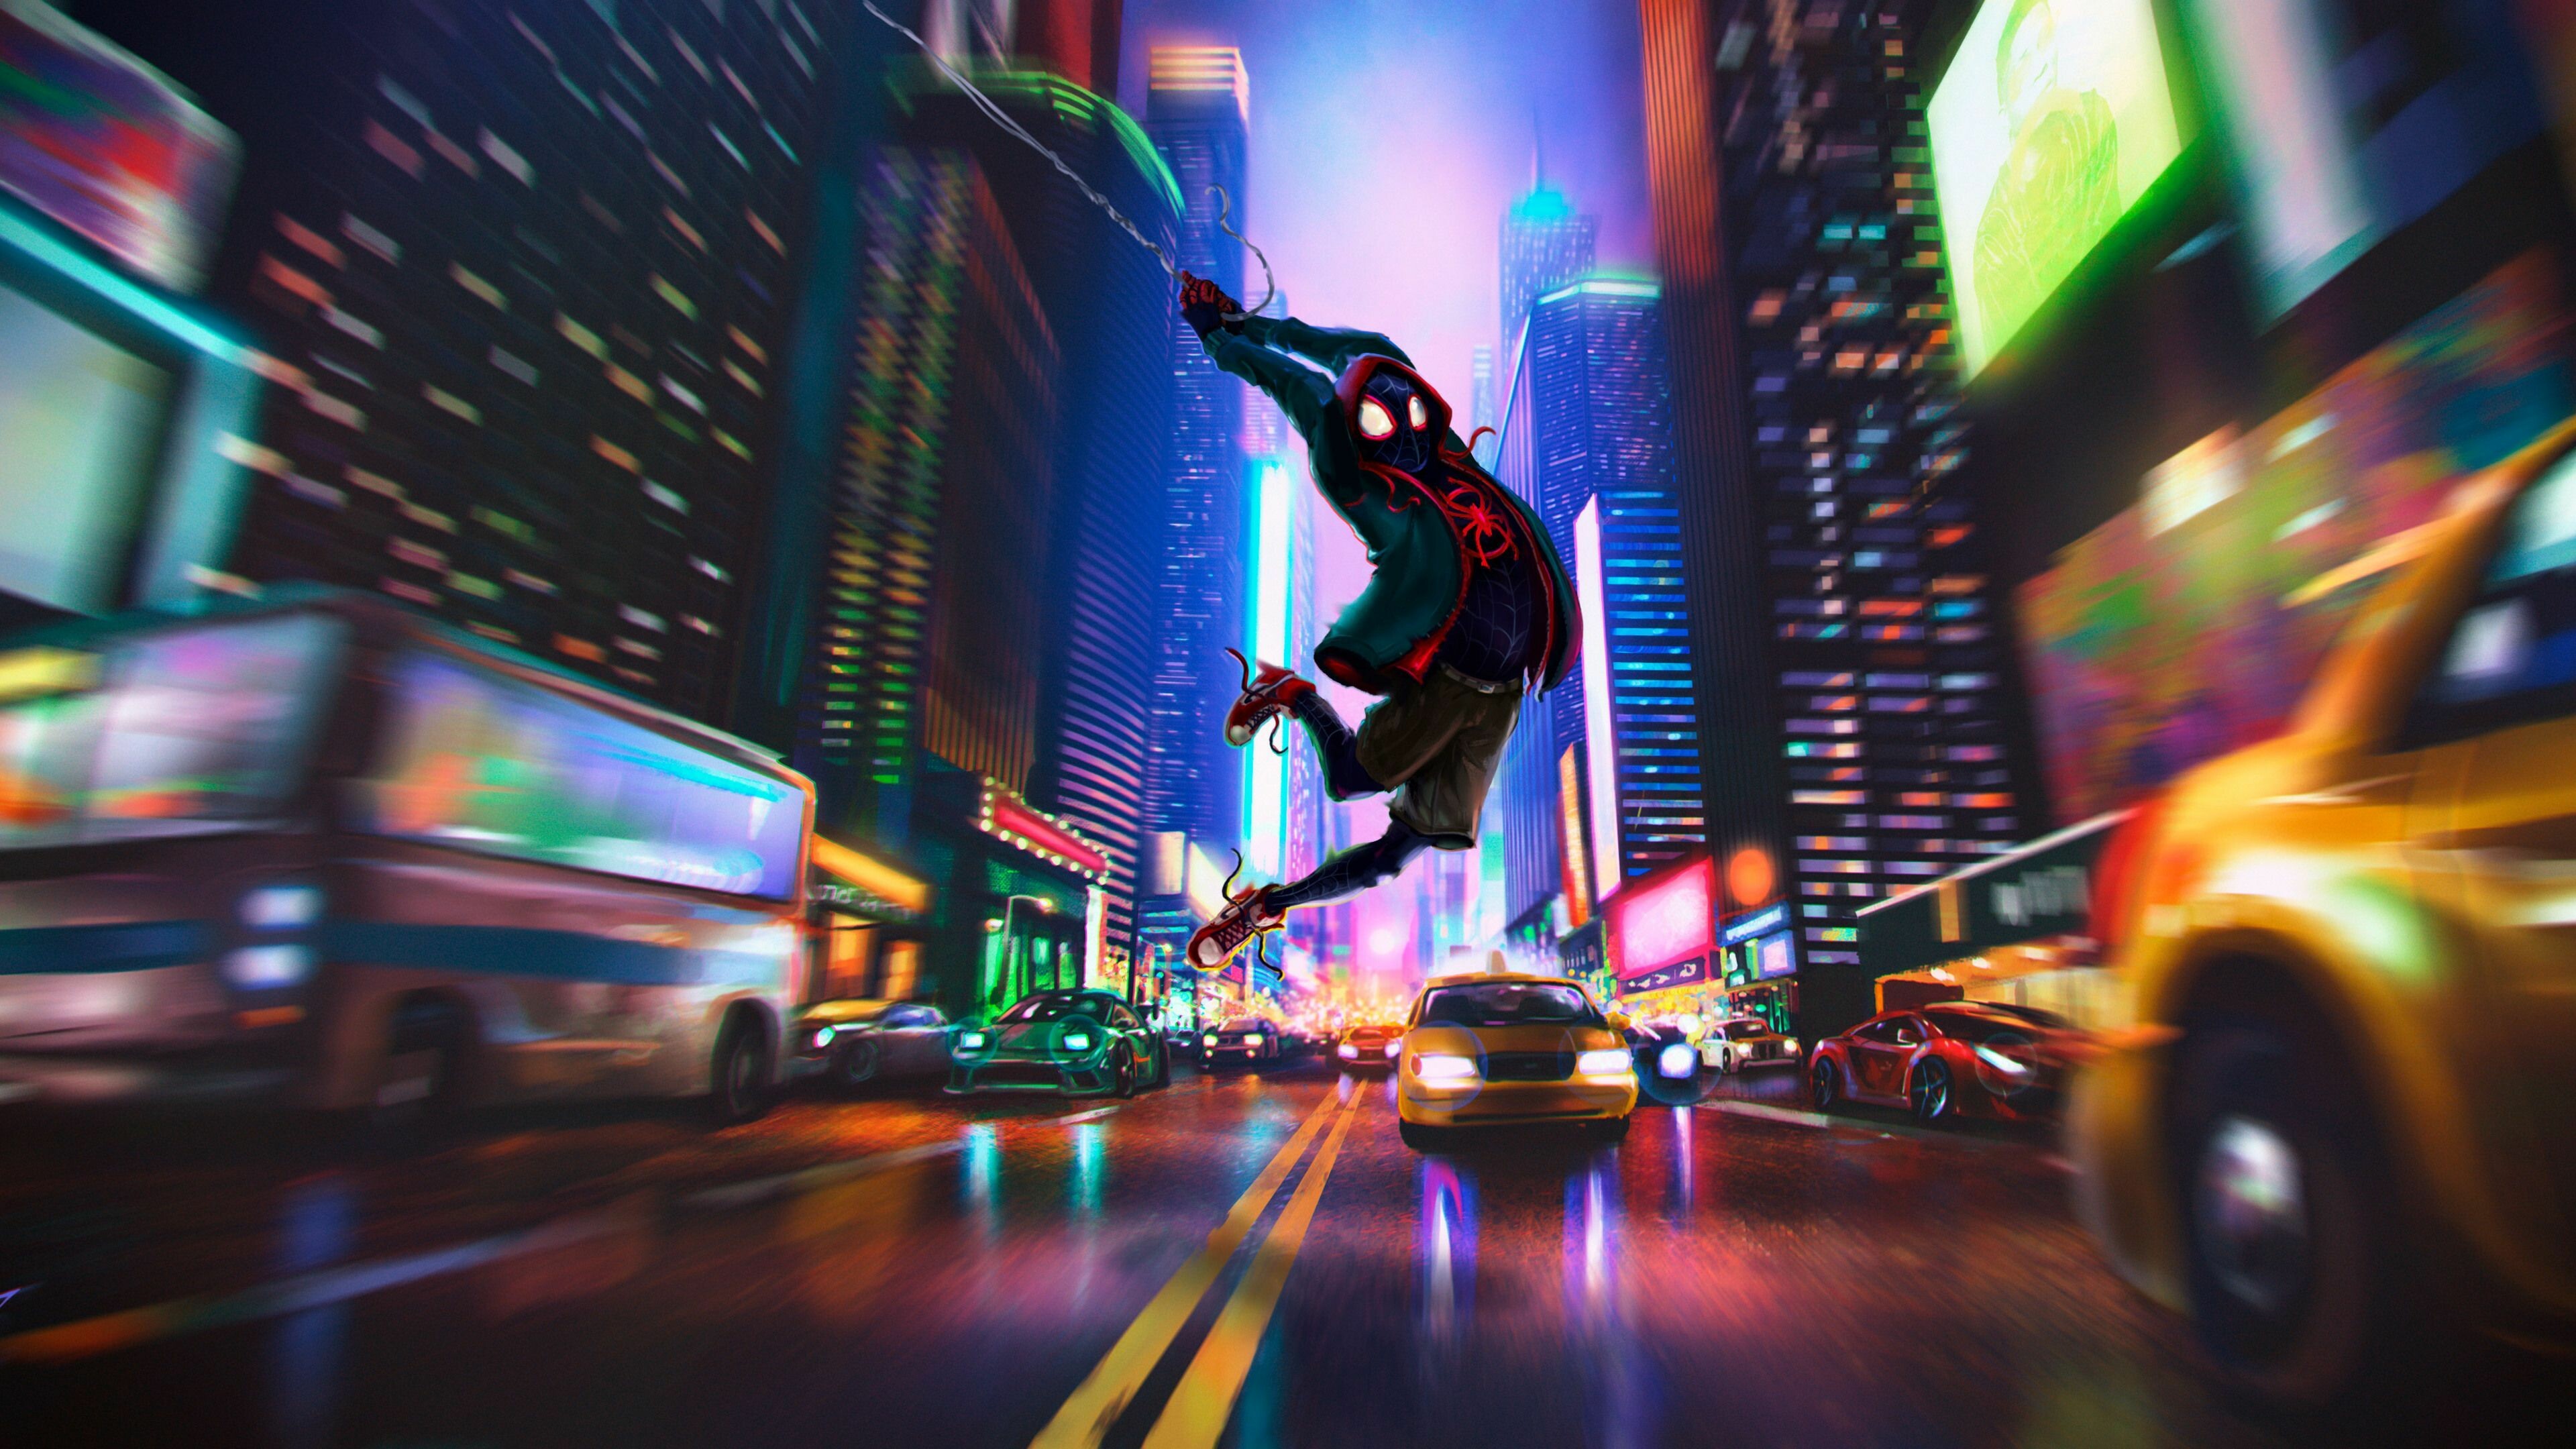 Spider-Man: Into the Spider-Verse: Directed by Bob Persichetti, Peter Ramsey, and Rodney Rothman. 3840x2160 4K Wallpaper.